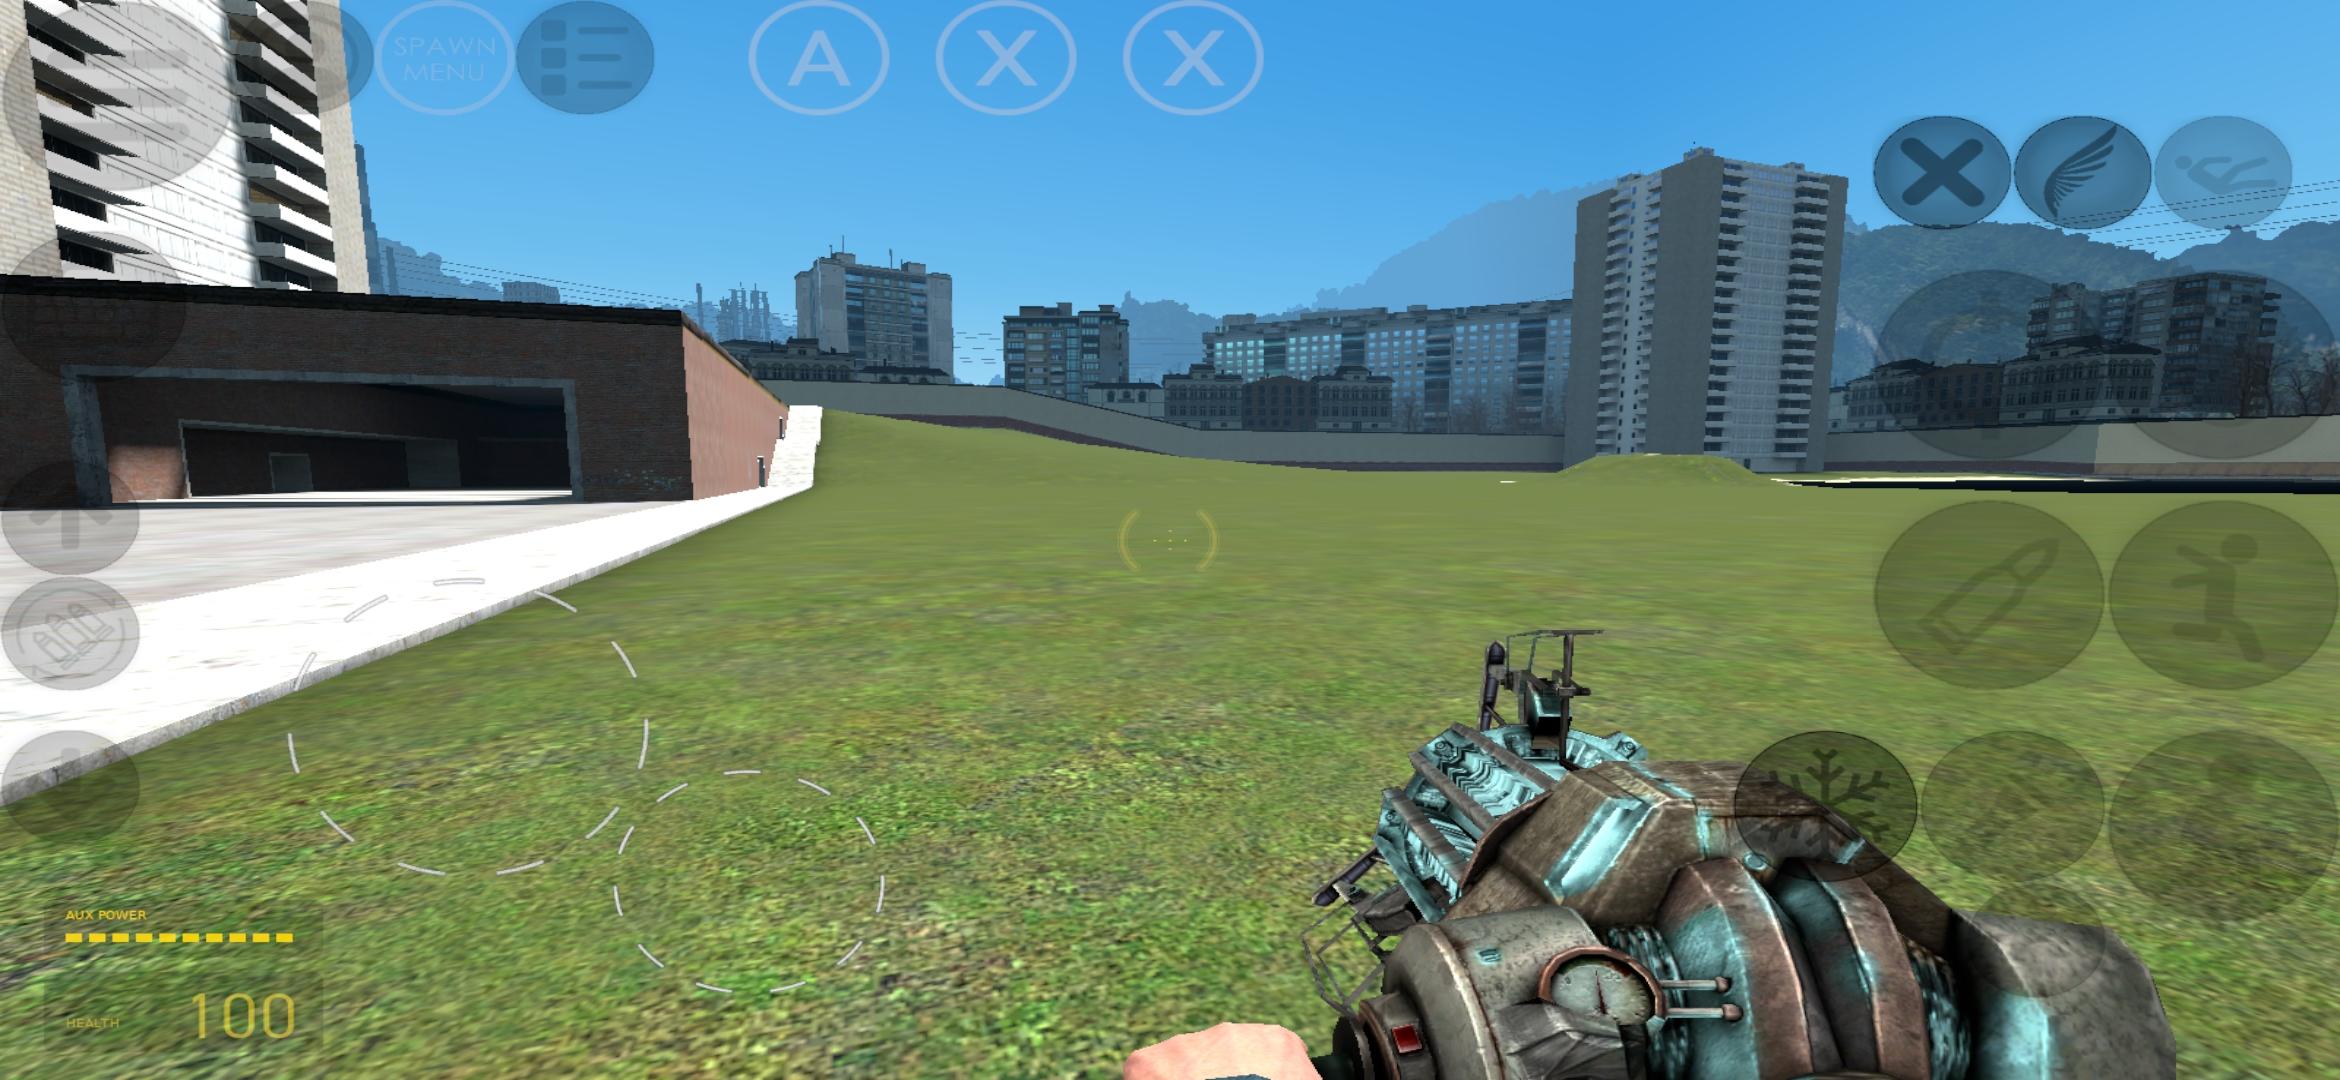 Garry's Mod Apk Free Download For Android 2023